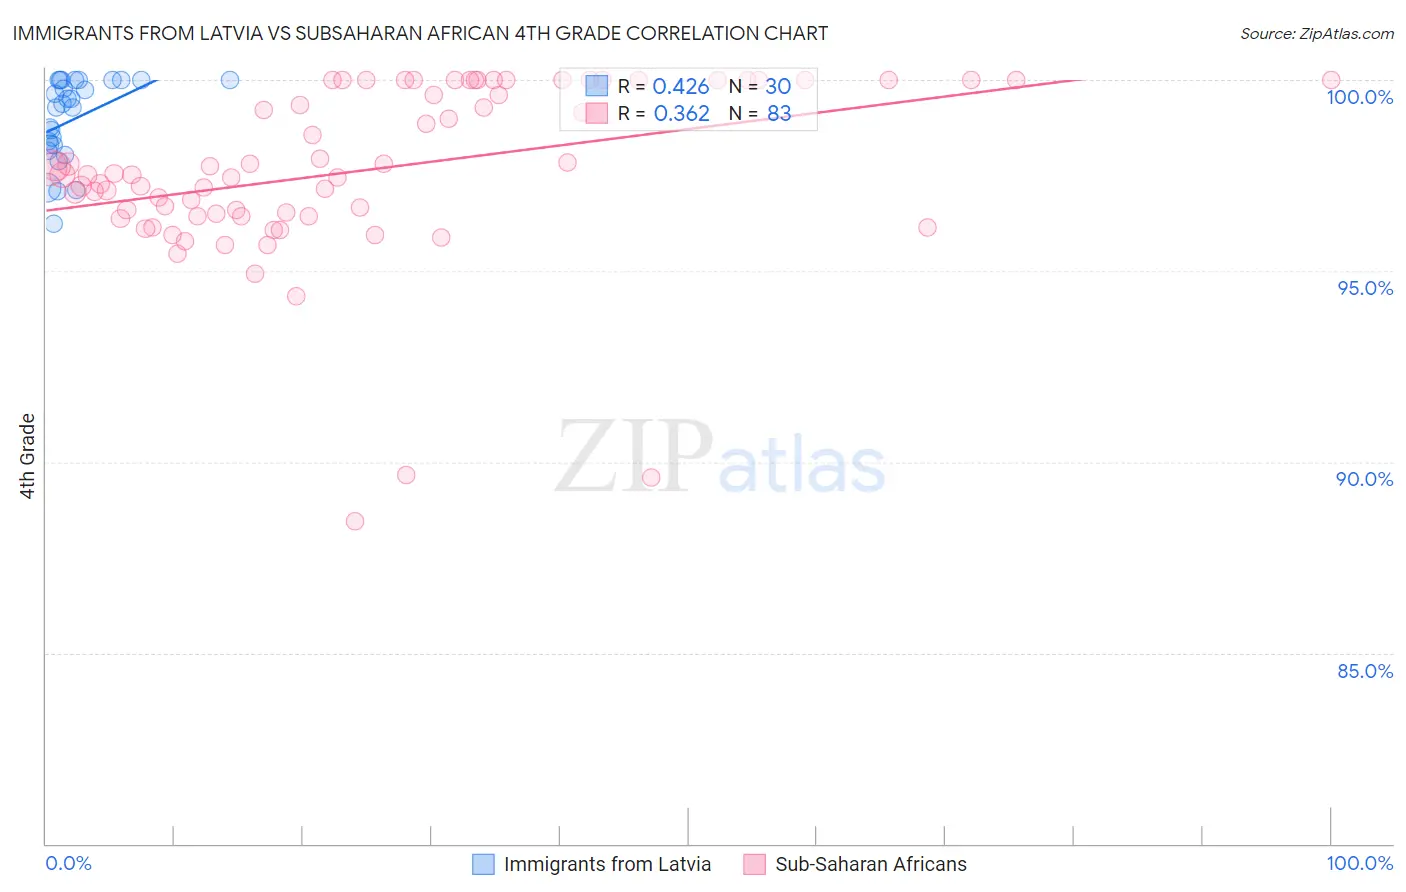 Immigrants from Latvia vs Subsaharan African 4th Grade